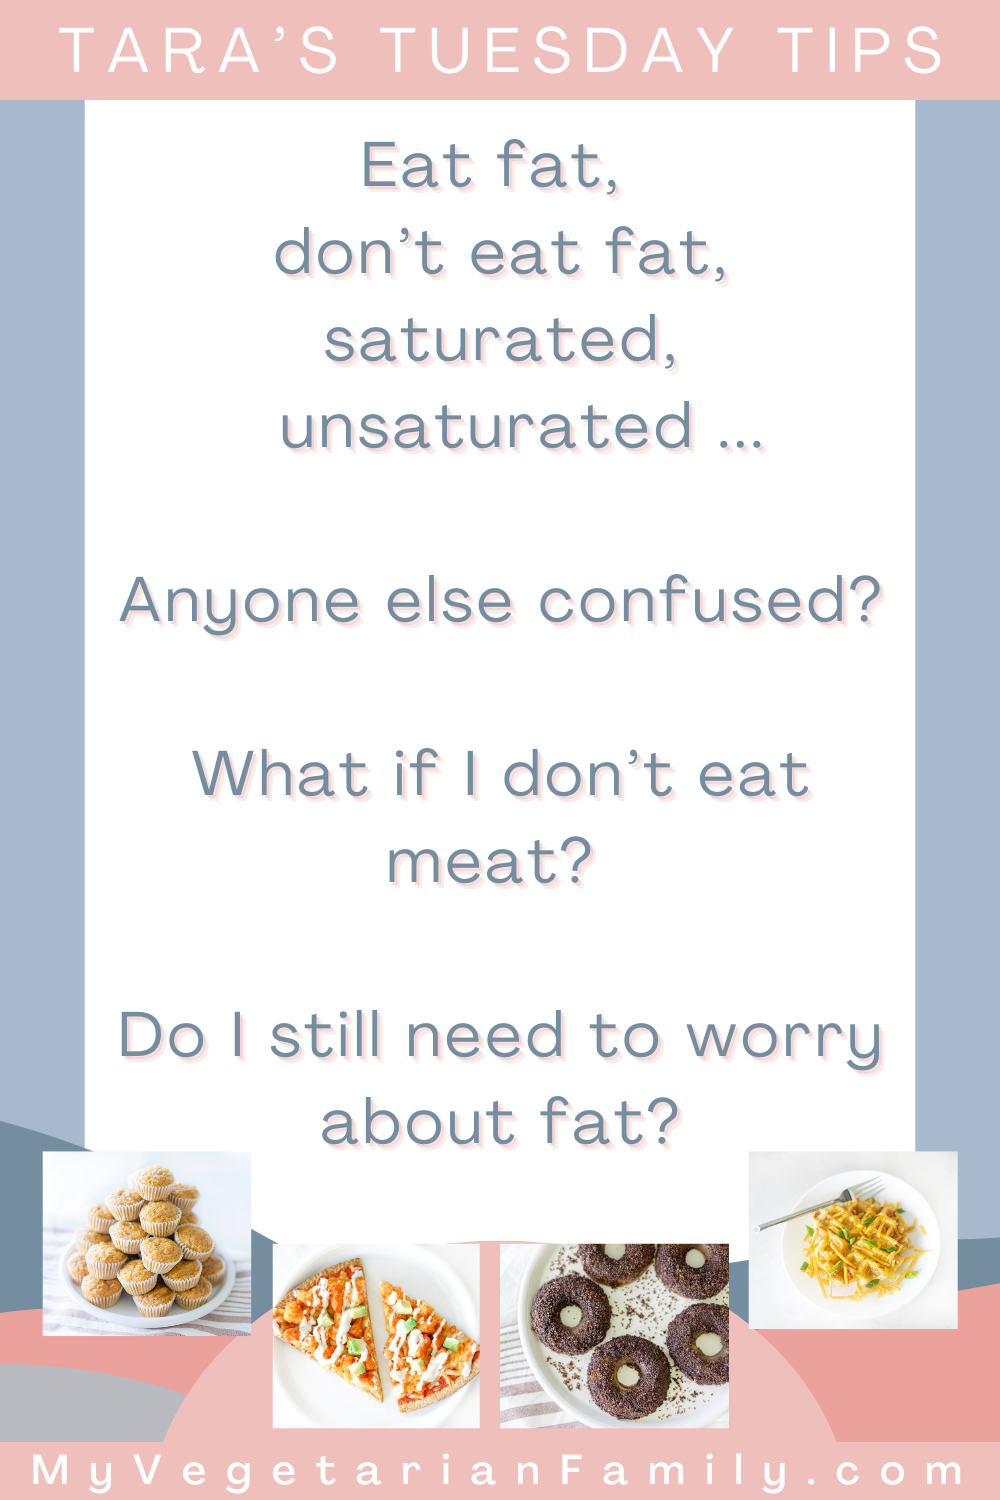 Do Vegetarians Need to Worry About Saturated Fats? | Tara's Tuesday Tips | My Vegetarian Family #saturatedfat #plantbasedsaturatedfats